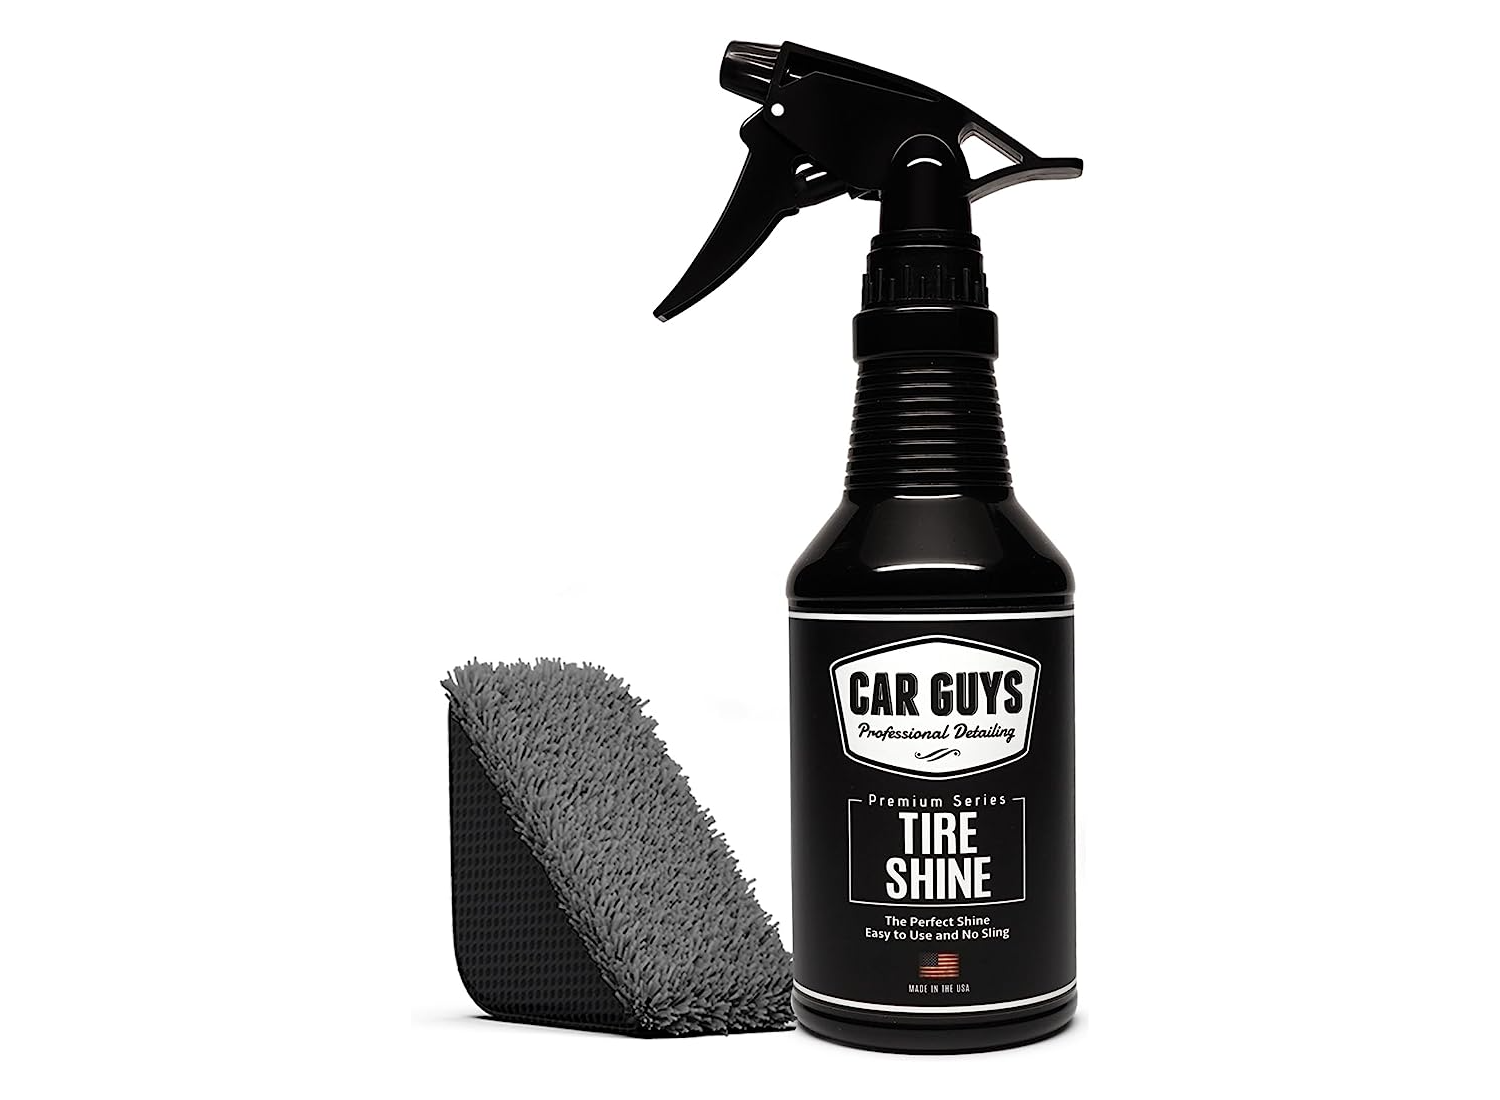 What's The Best Tire Shine Product Recommended By An Expert